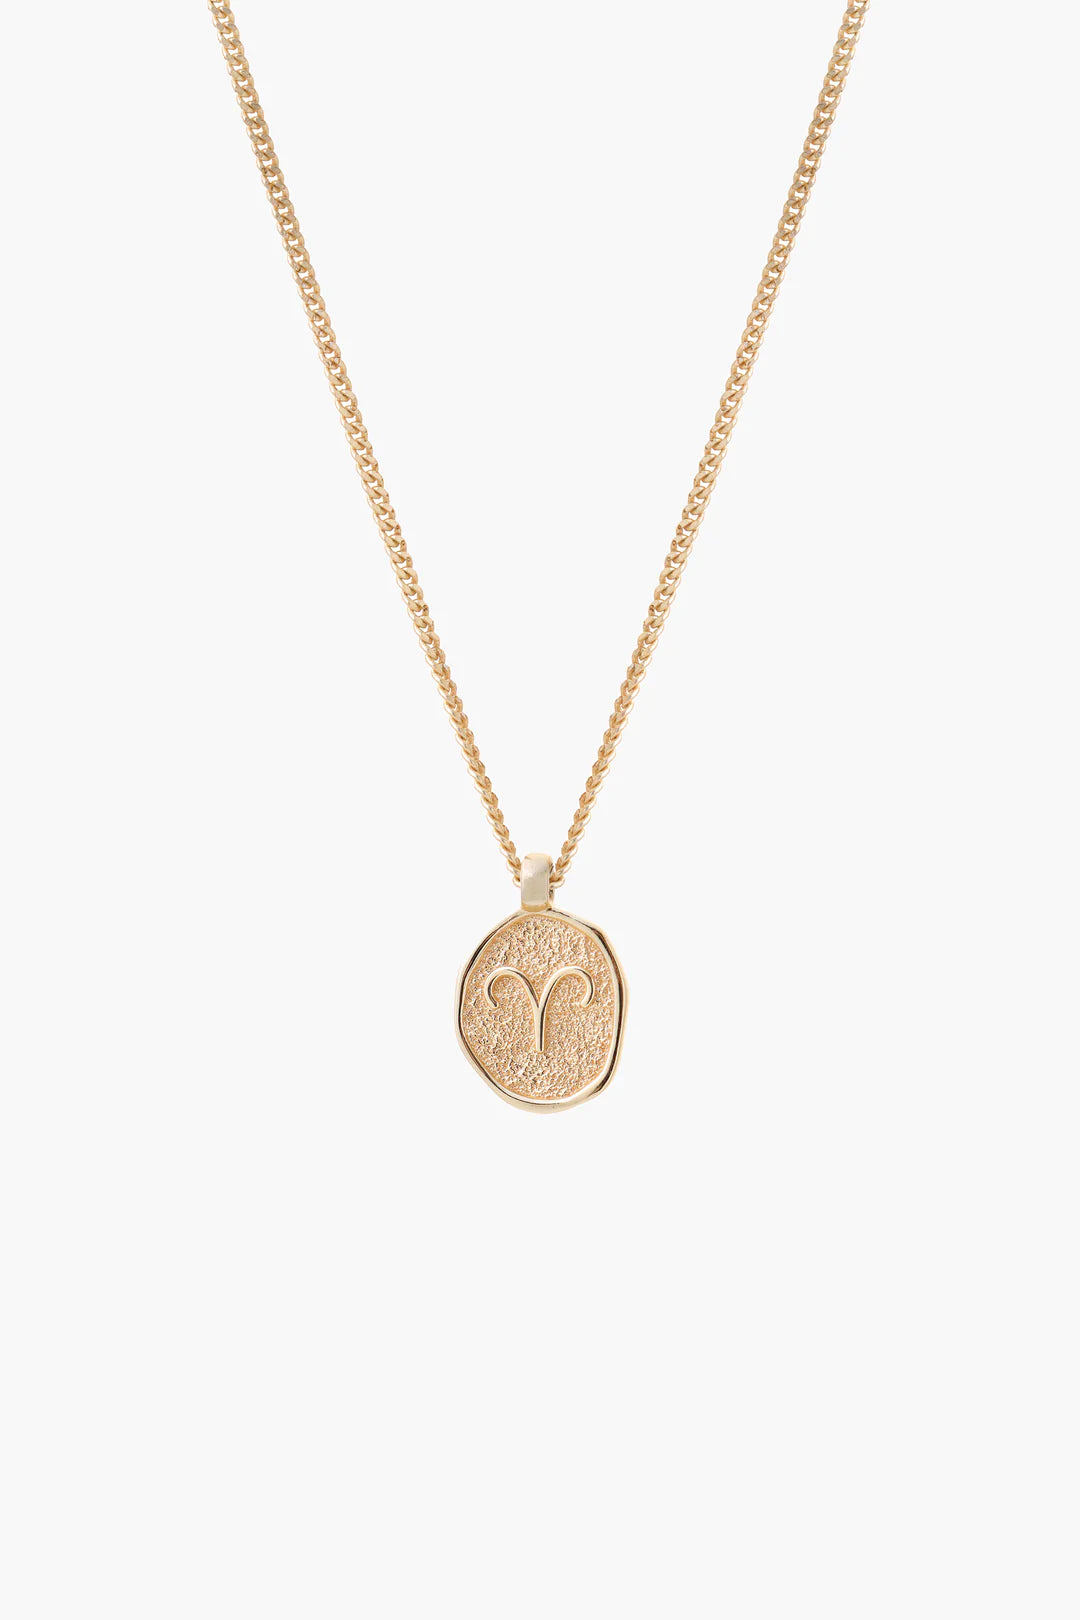 ARIES GOLD NECKLACE